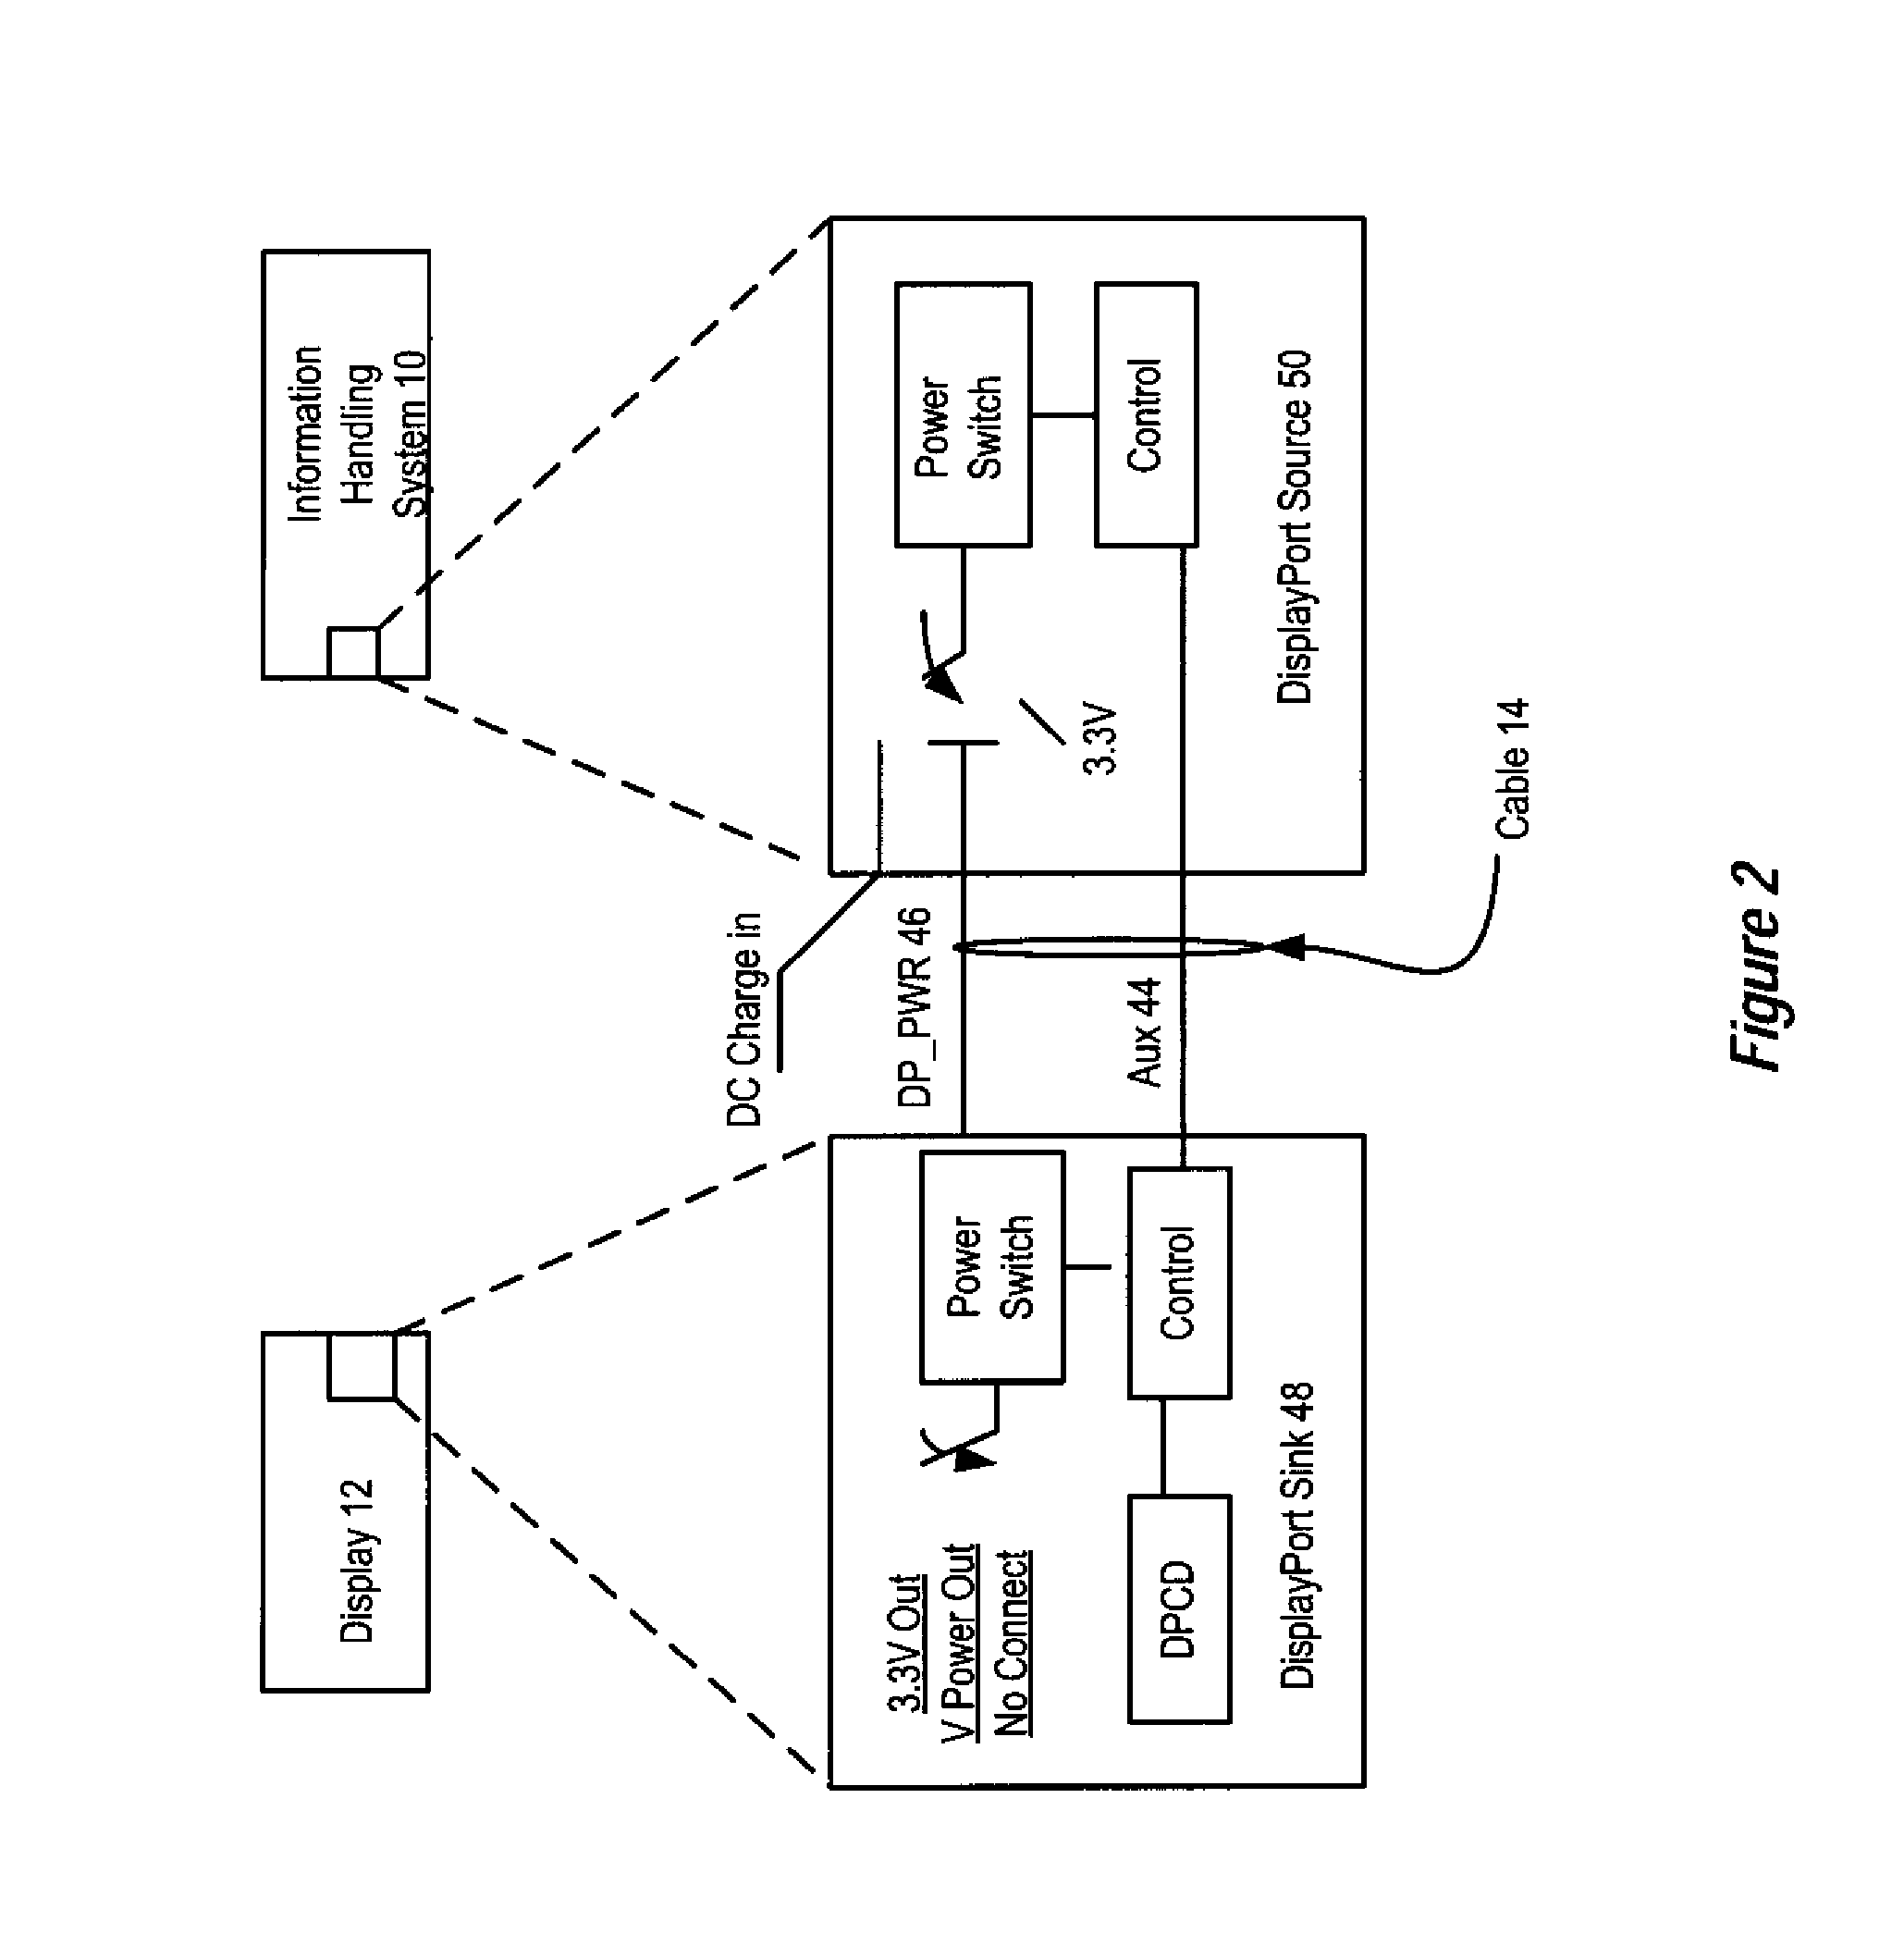 System and Method for Powering an Information Handling System Through a Display Cable